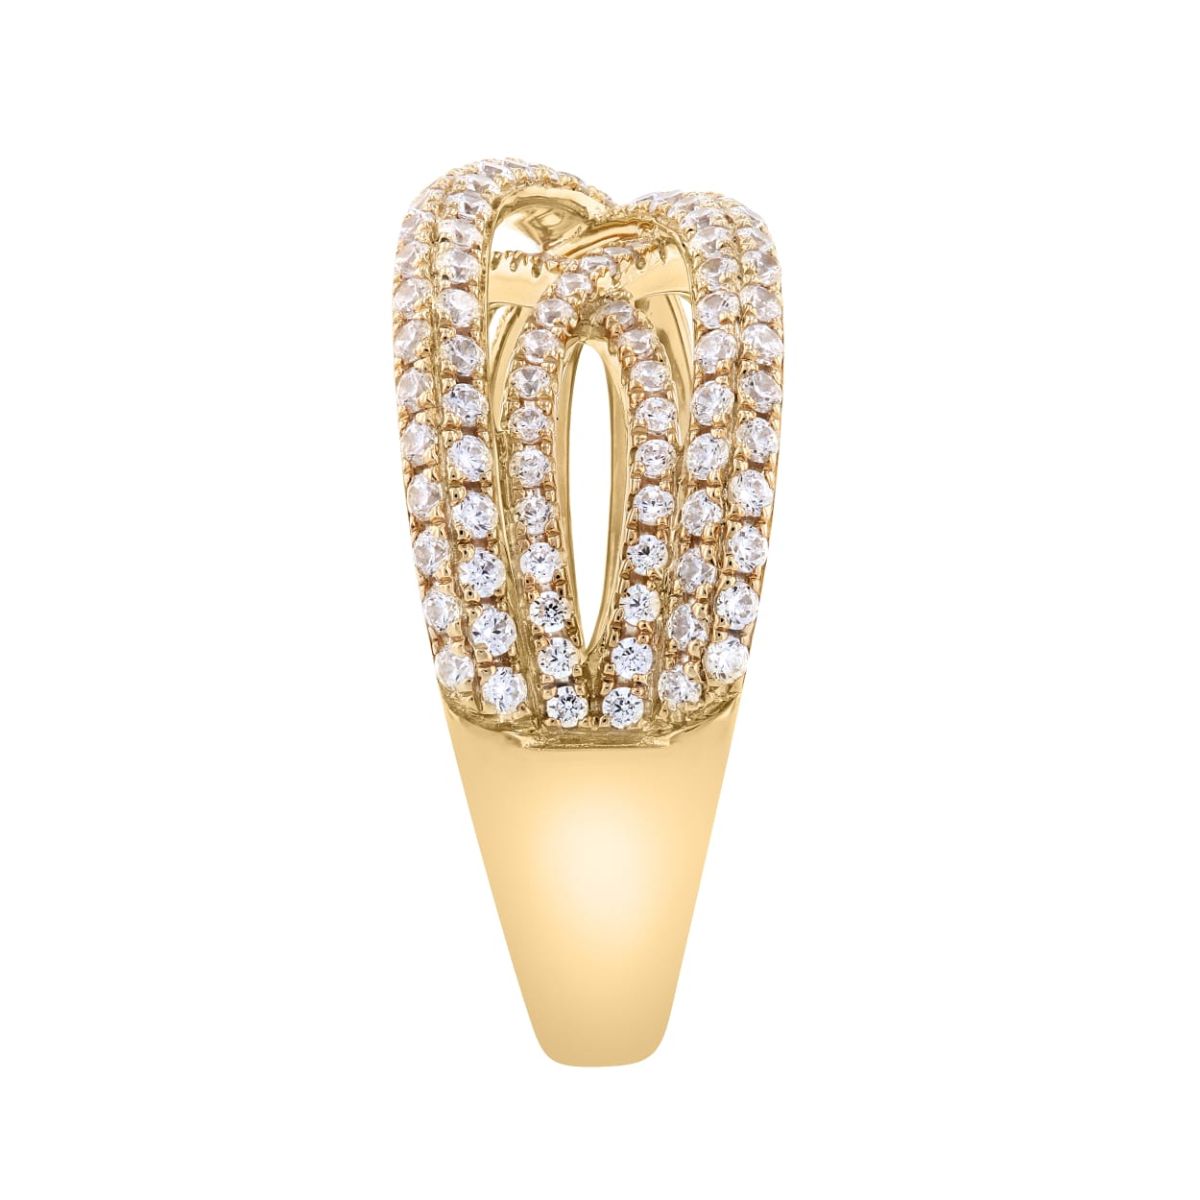 jewellery photo editing outsourcing services